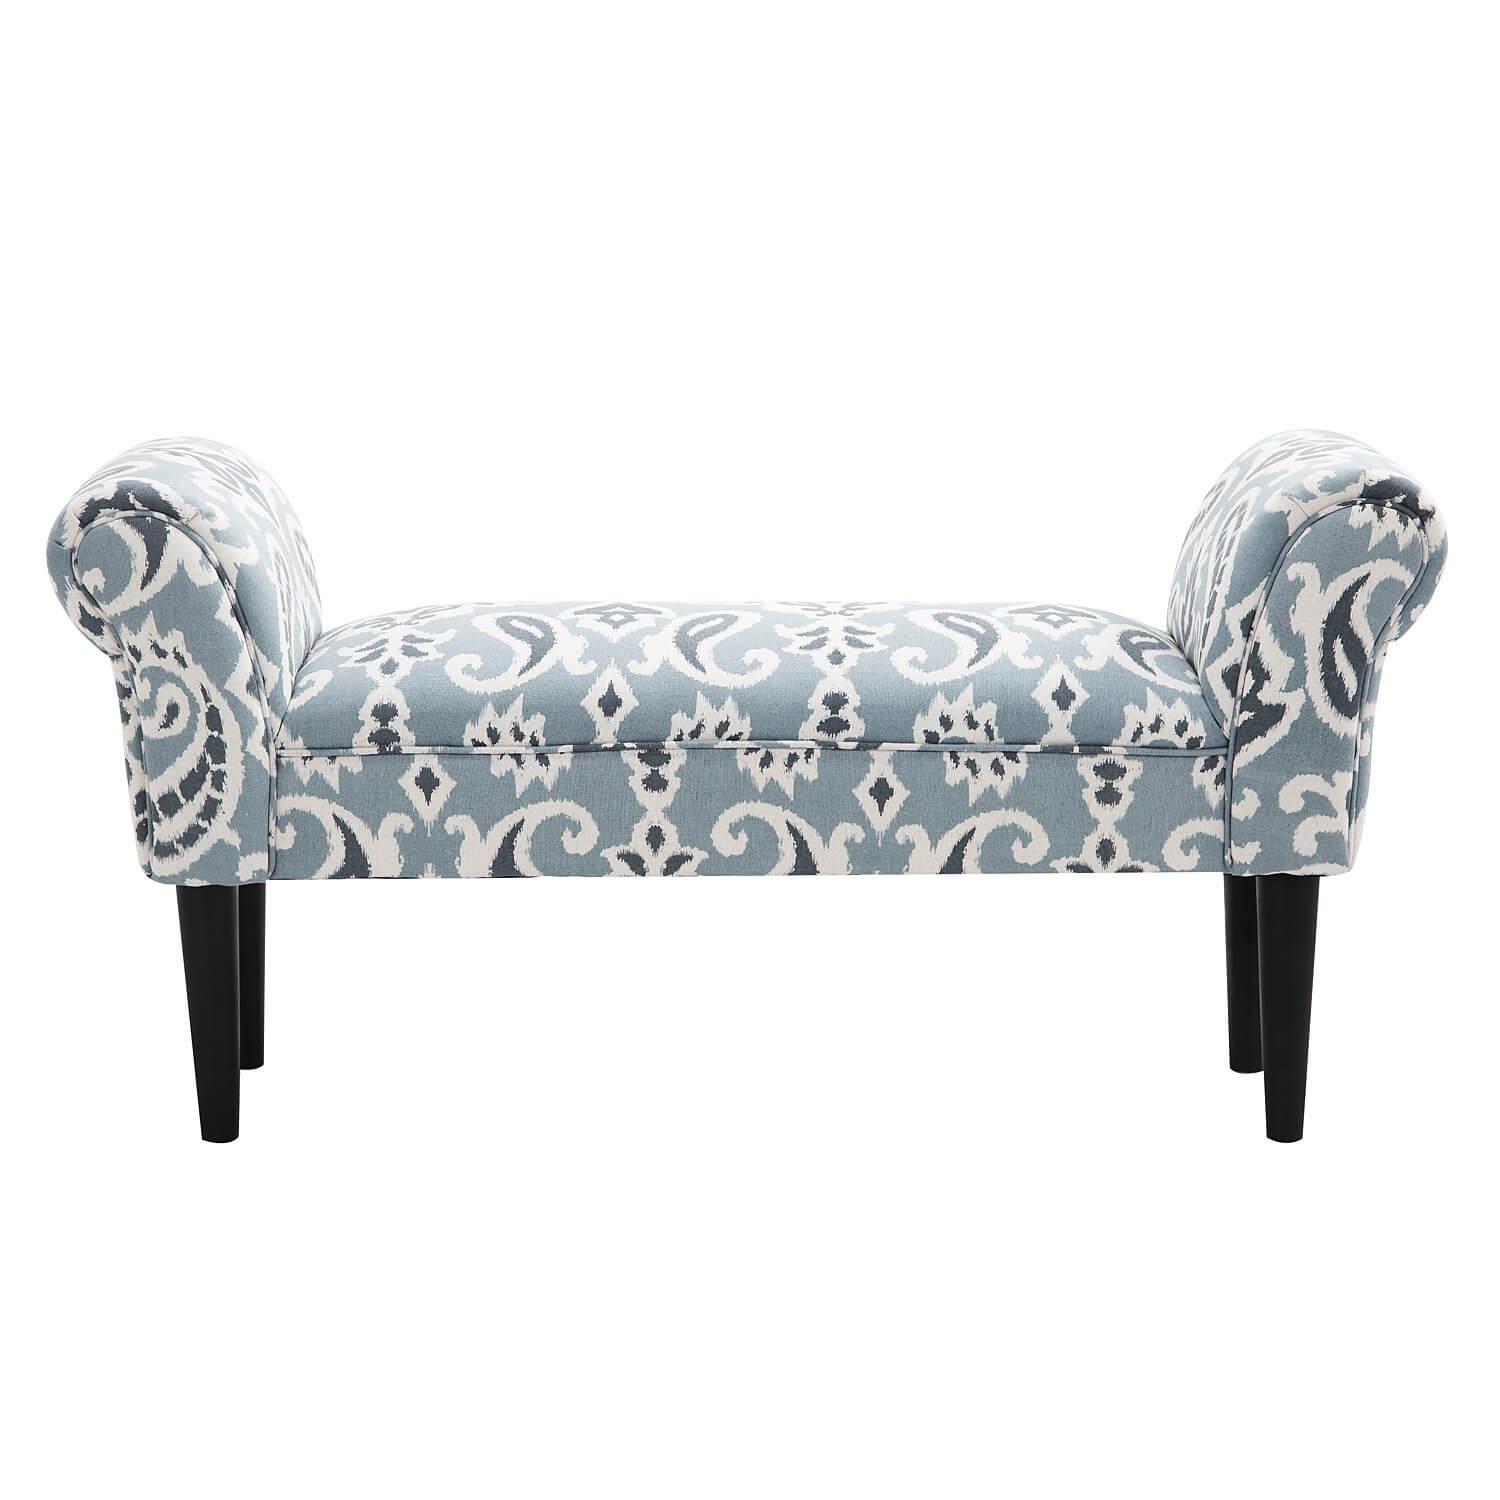 Divan backless settee bench in blue roll patterns | NONAGON.style